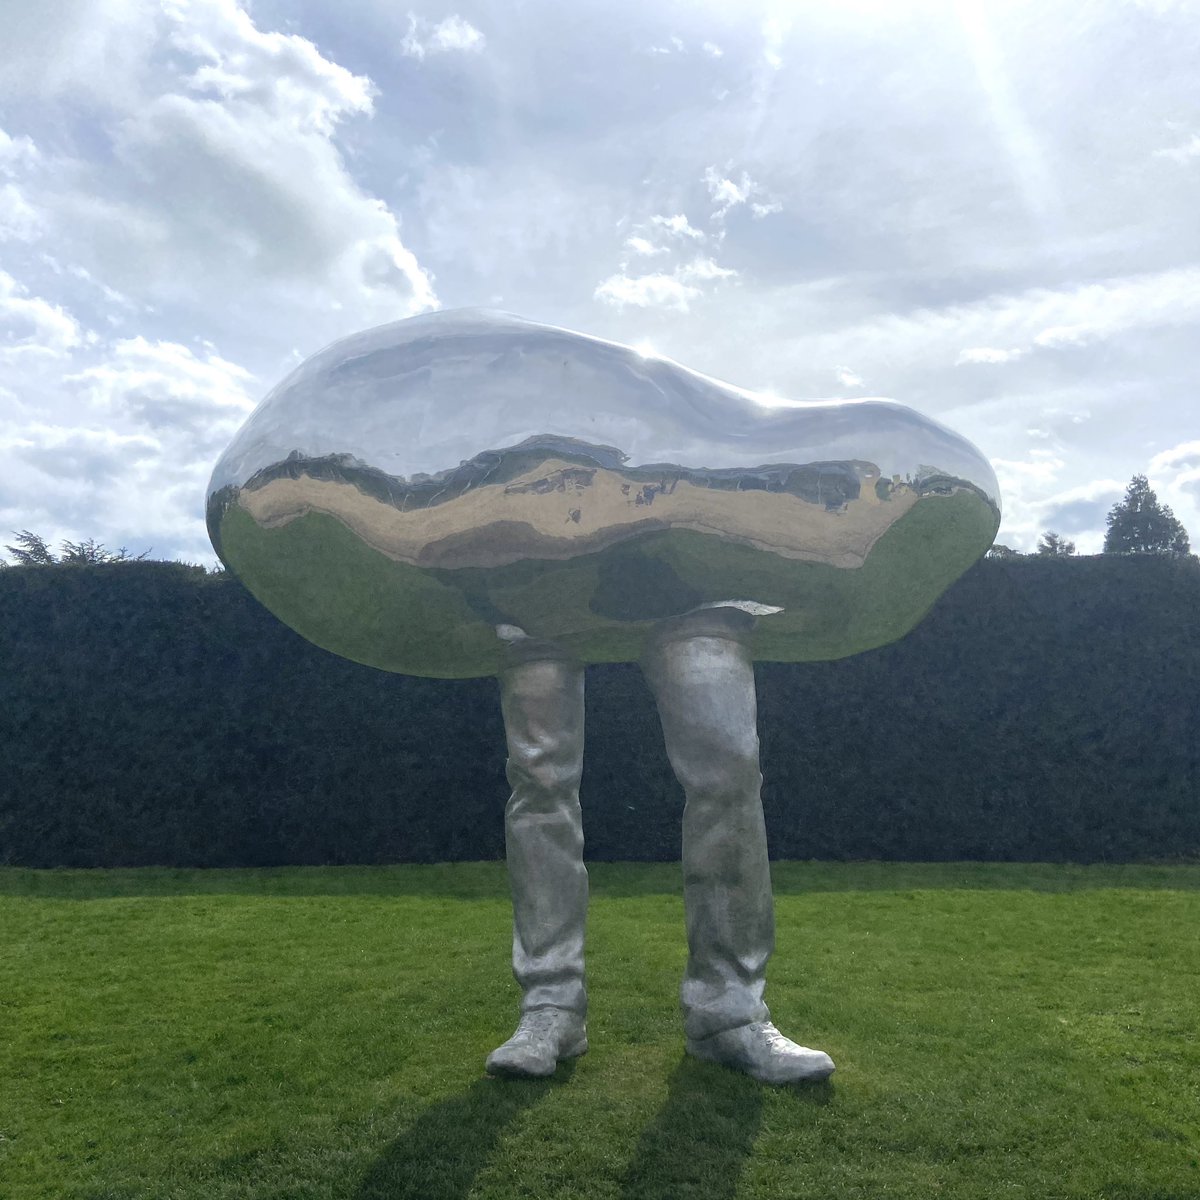 Sun-rain-sun-rain-sun at Yorkshire Sculpture Park @YSPsculpture today. A very lovely stroll in the countryside looking at sculptures, my favourite of which was this giant potato on legs 😀 Day 104/366 #photoaday